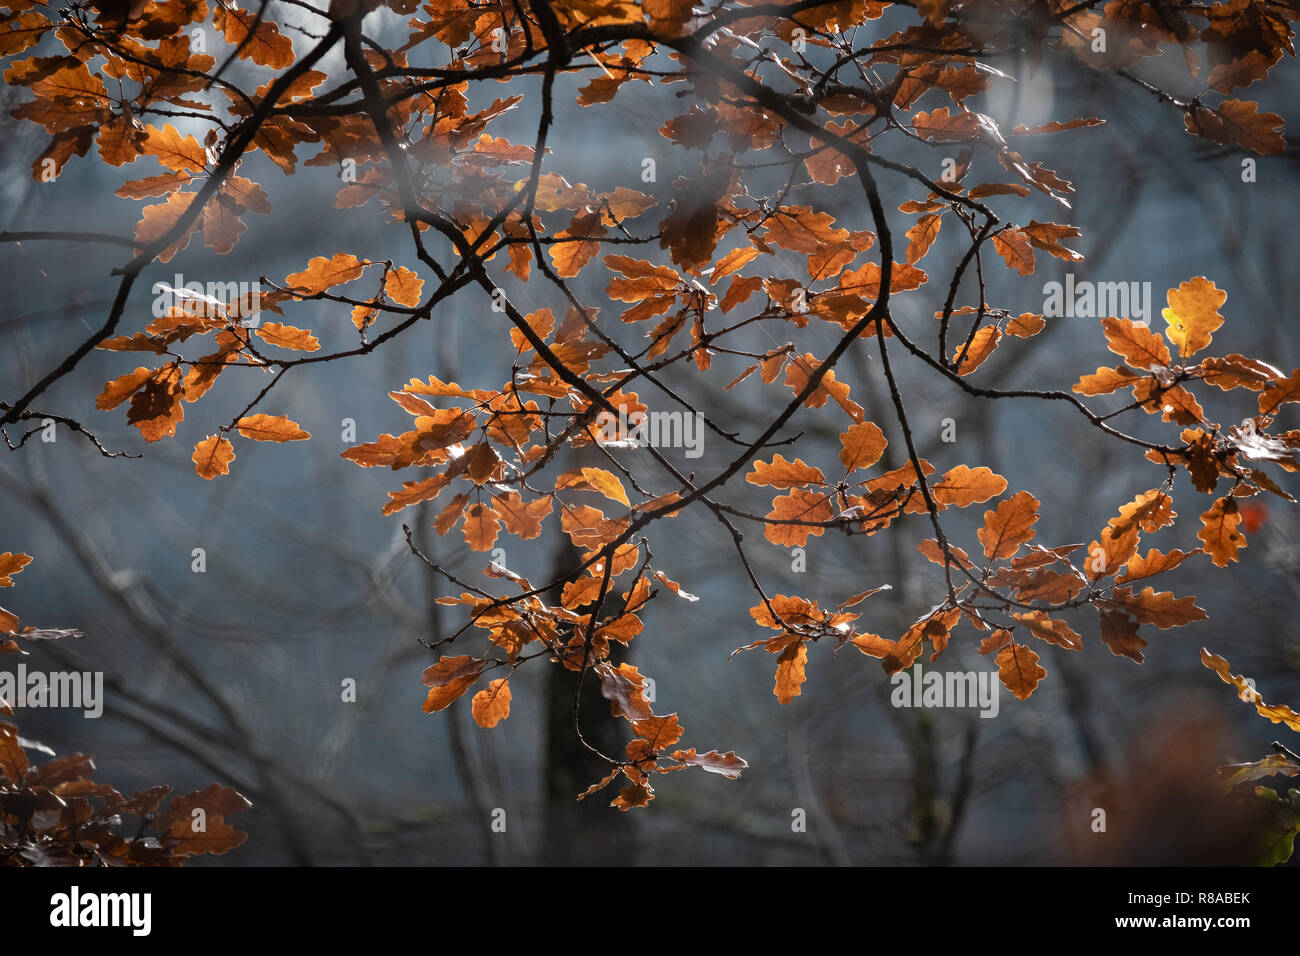 Autumnal forest. Leaves of yellow and orange colors in the branches of trees Stock Photo